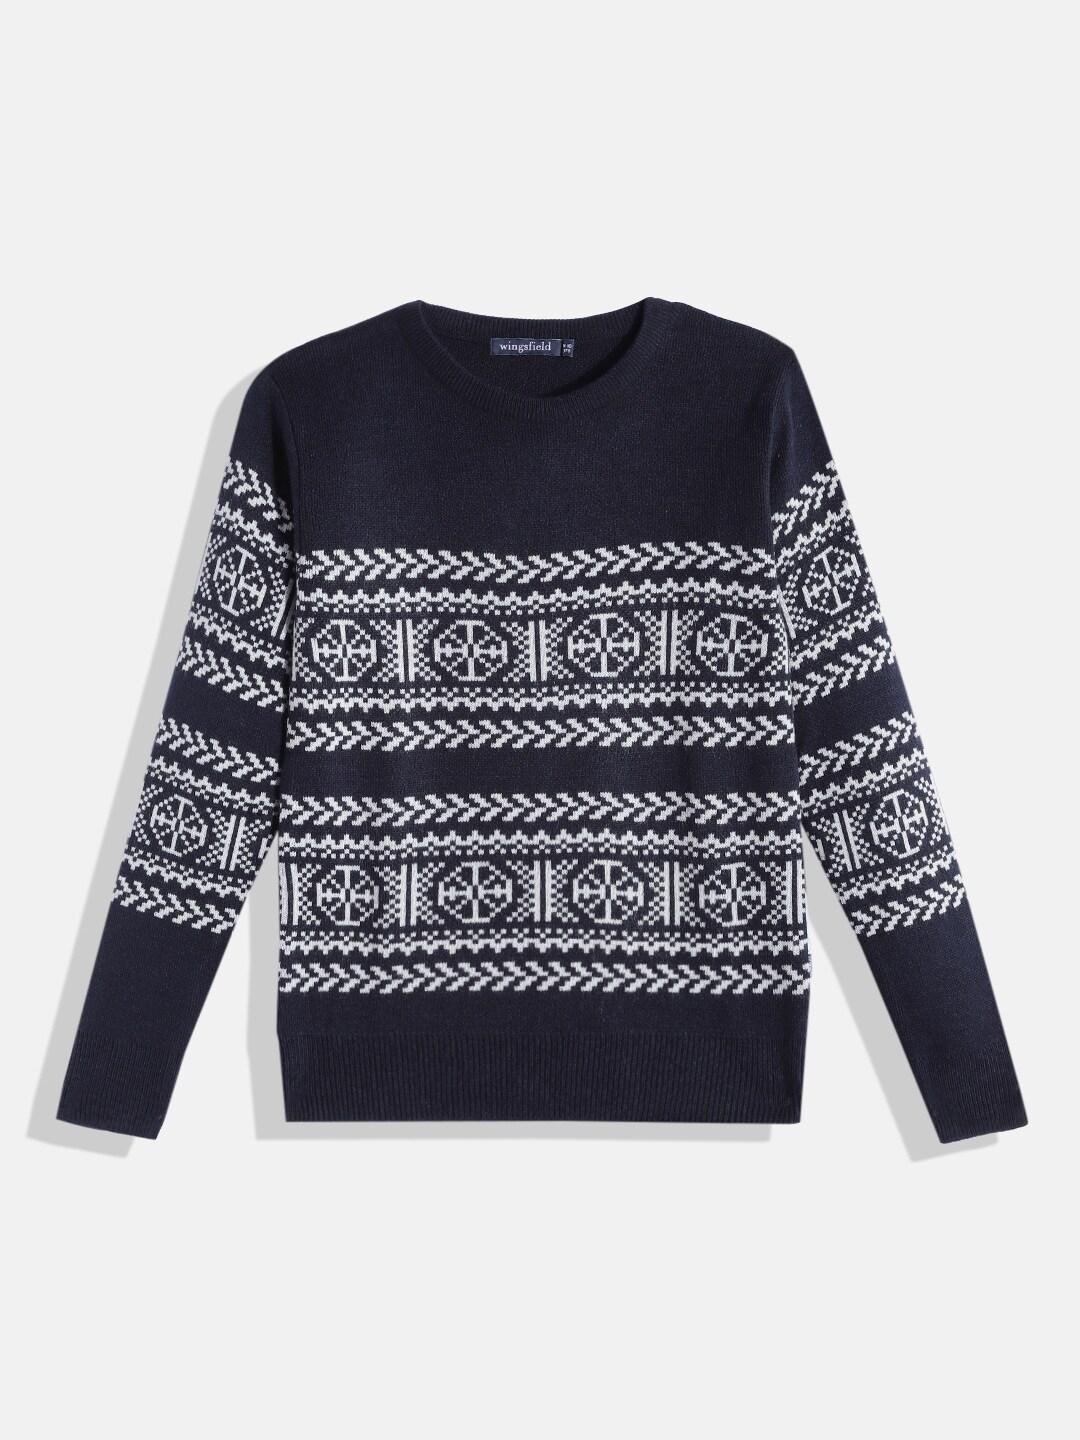 wingsfield boys navy blue & white self design acrylic pullover